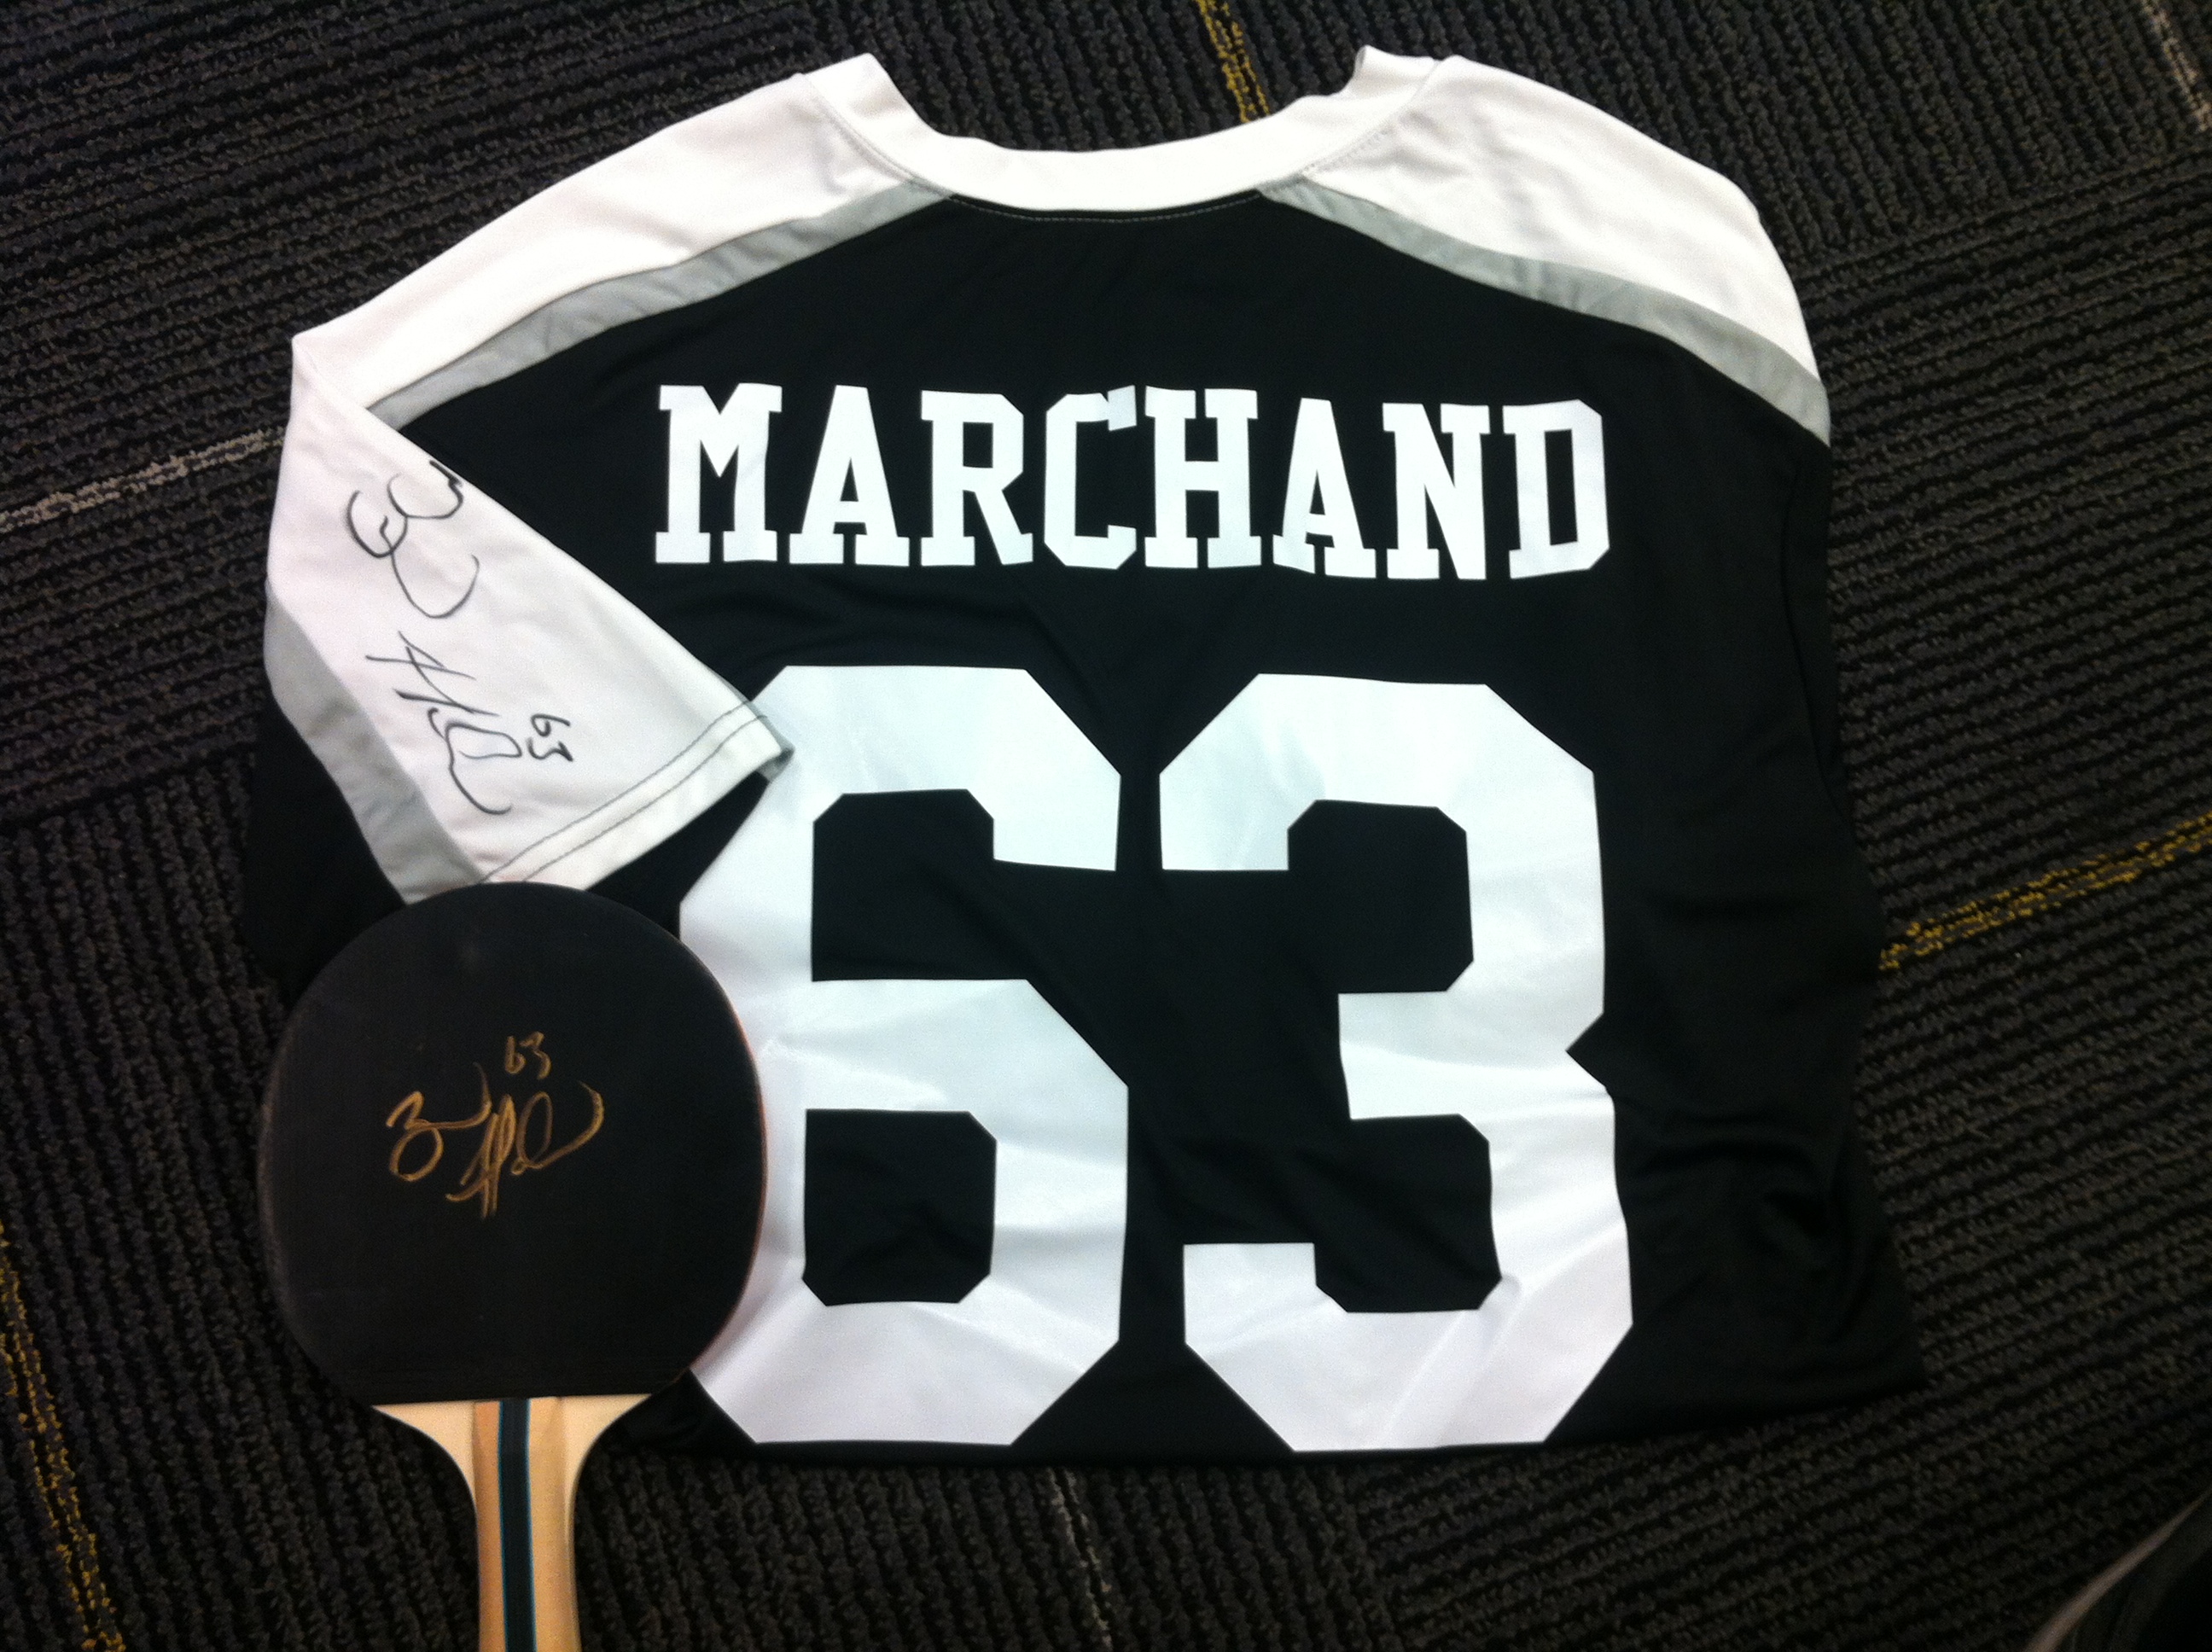 brad marchand signed jersey